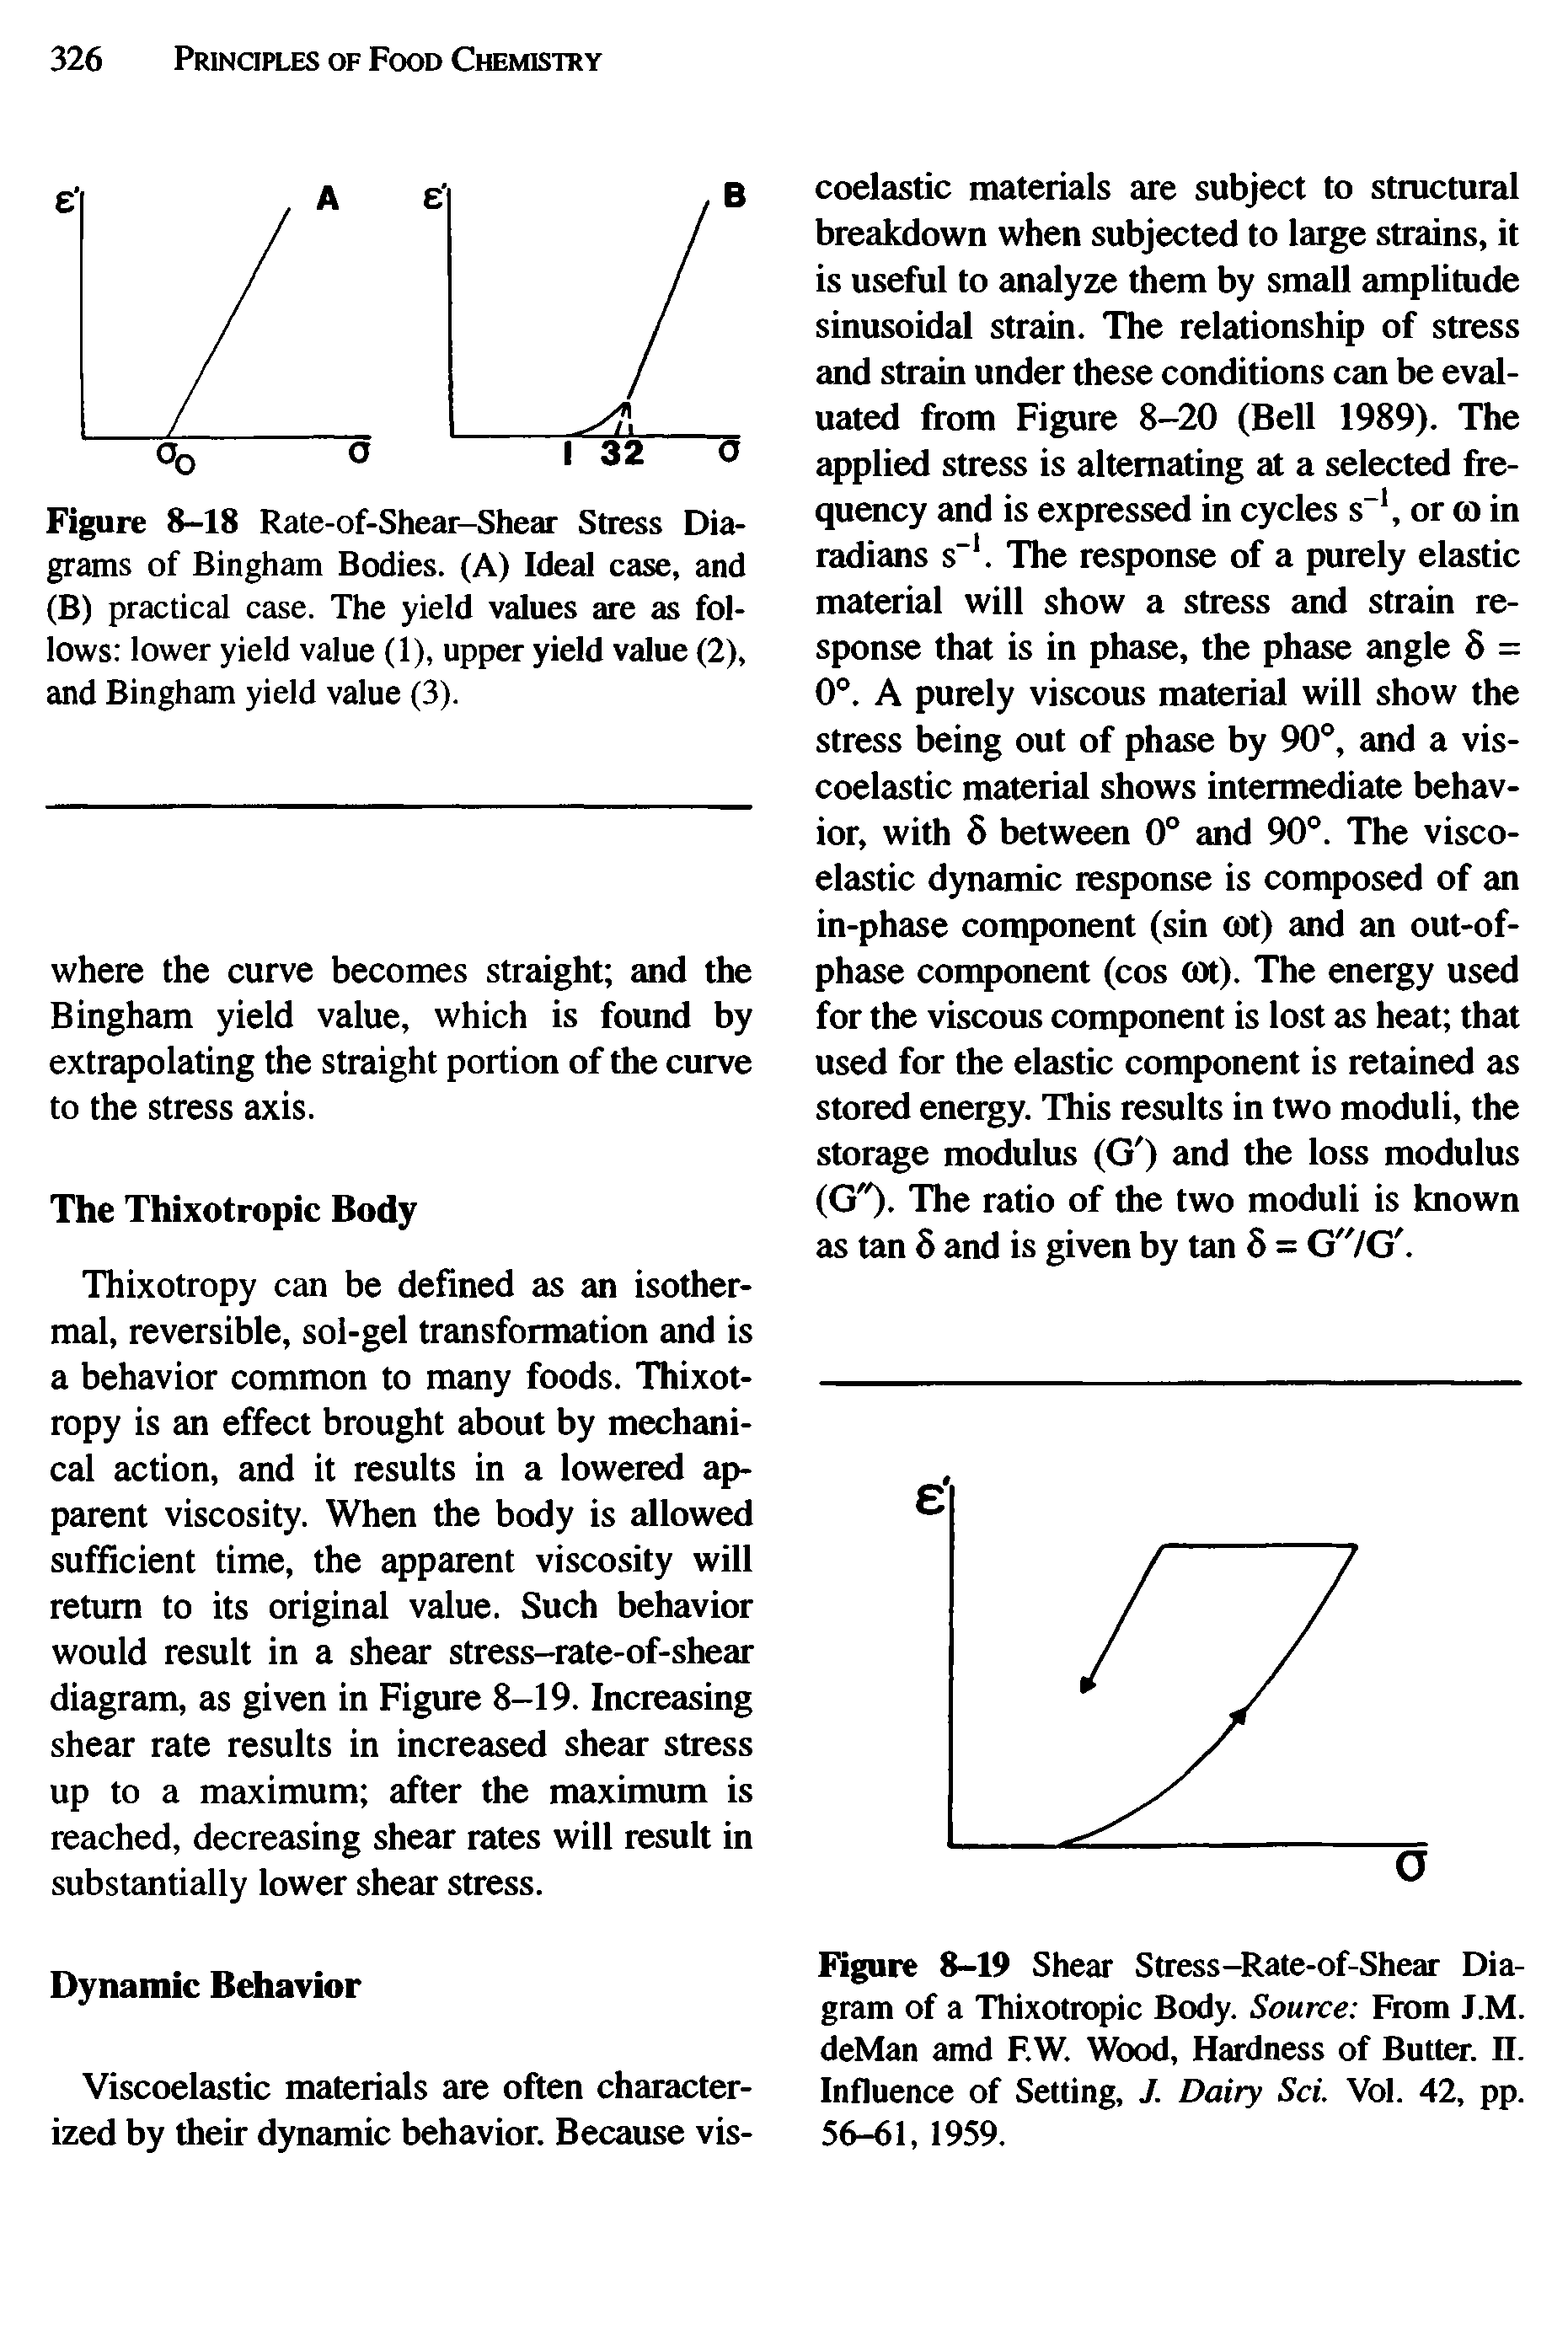 Figure 8-19 Shear Stress-Rate-of-Shear Diagram of a Thixotropic Body. Source From J.M. deMan amd F.W. Wood, Hardness of Butter. II. Influence of Setting, J. Dairy Sci. Vol. 42, pp. 56-61, 1959.